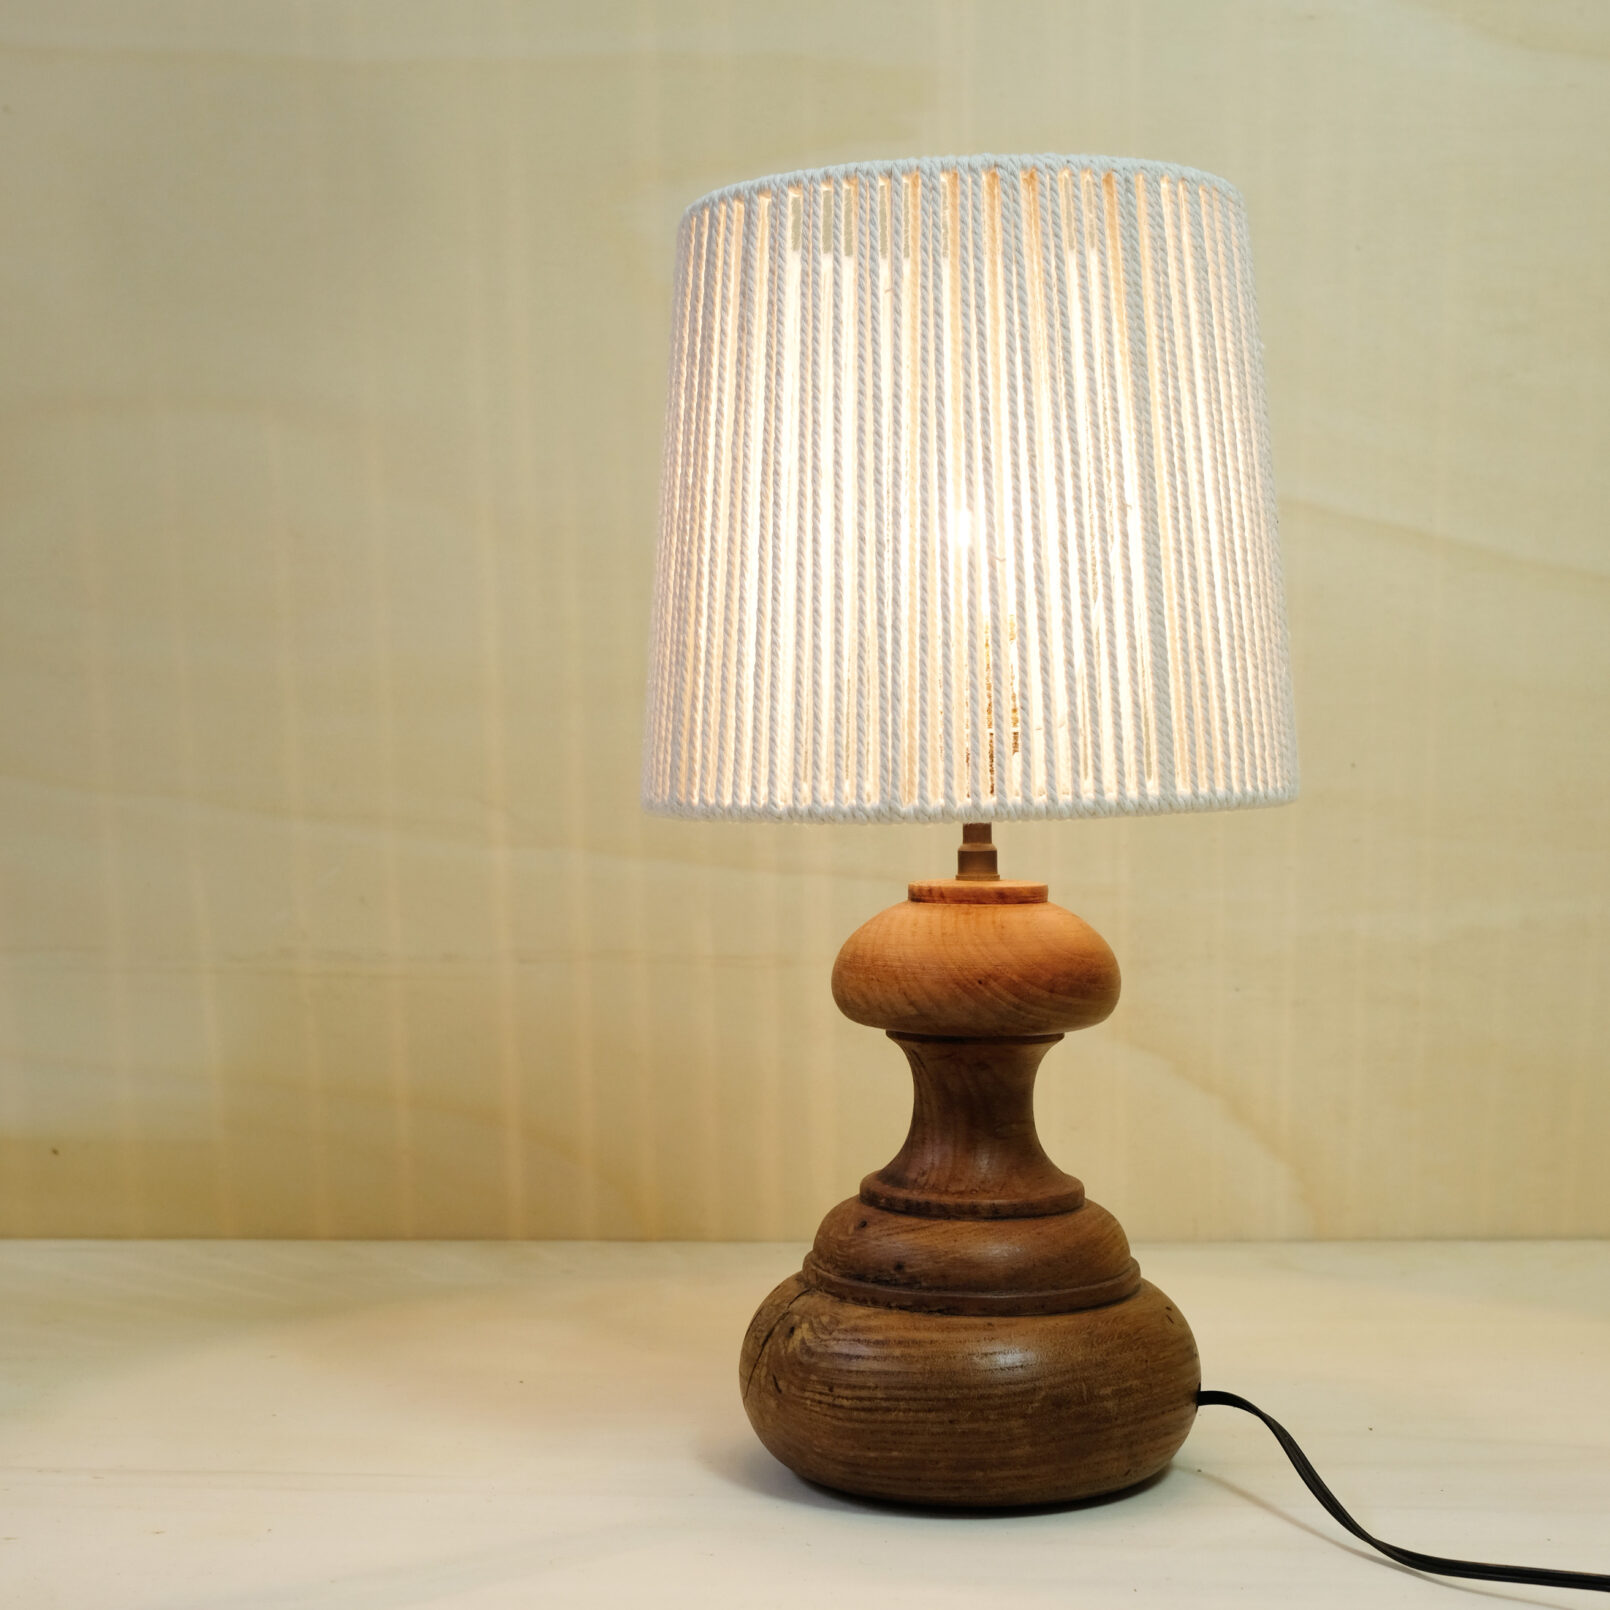 Table lamp with a turned wooden base, 1960-1970.